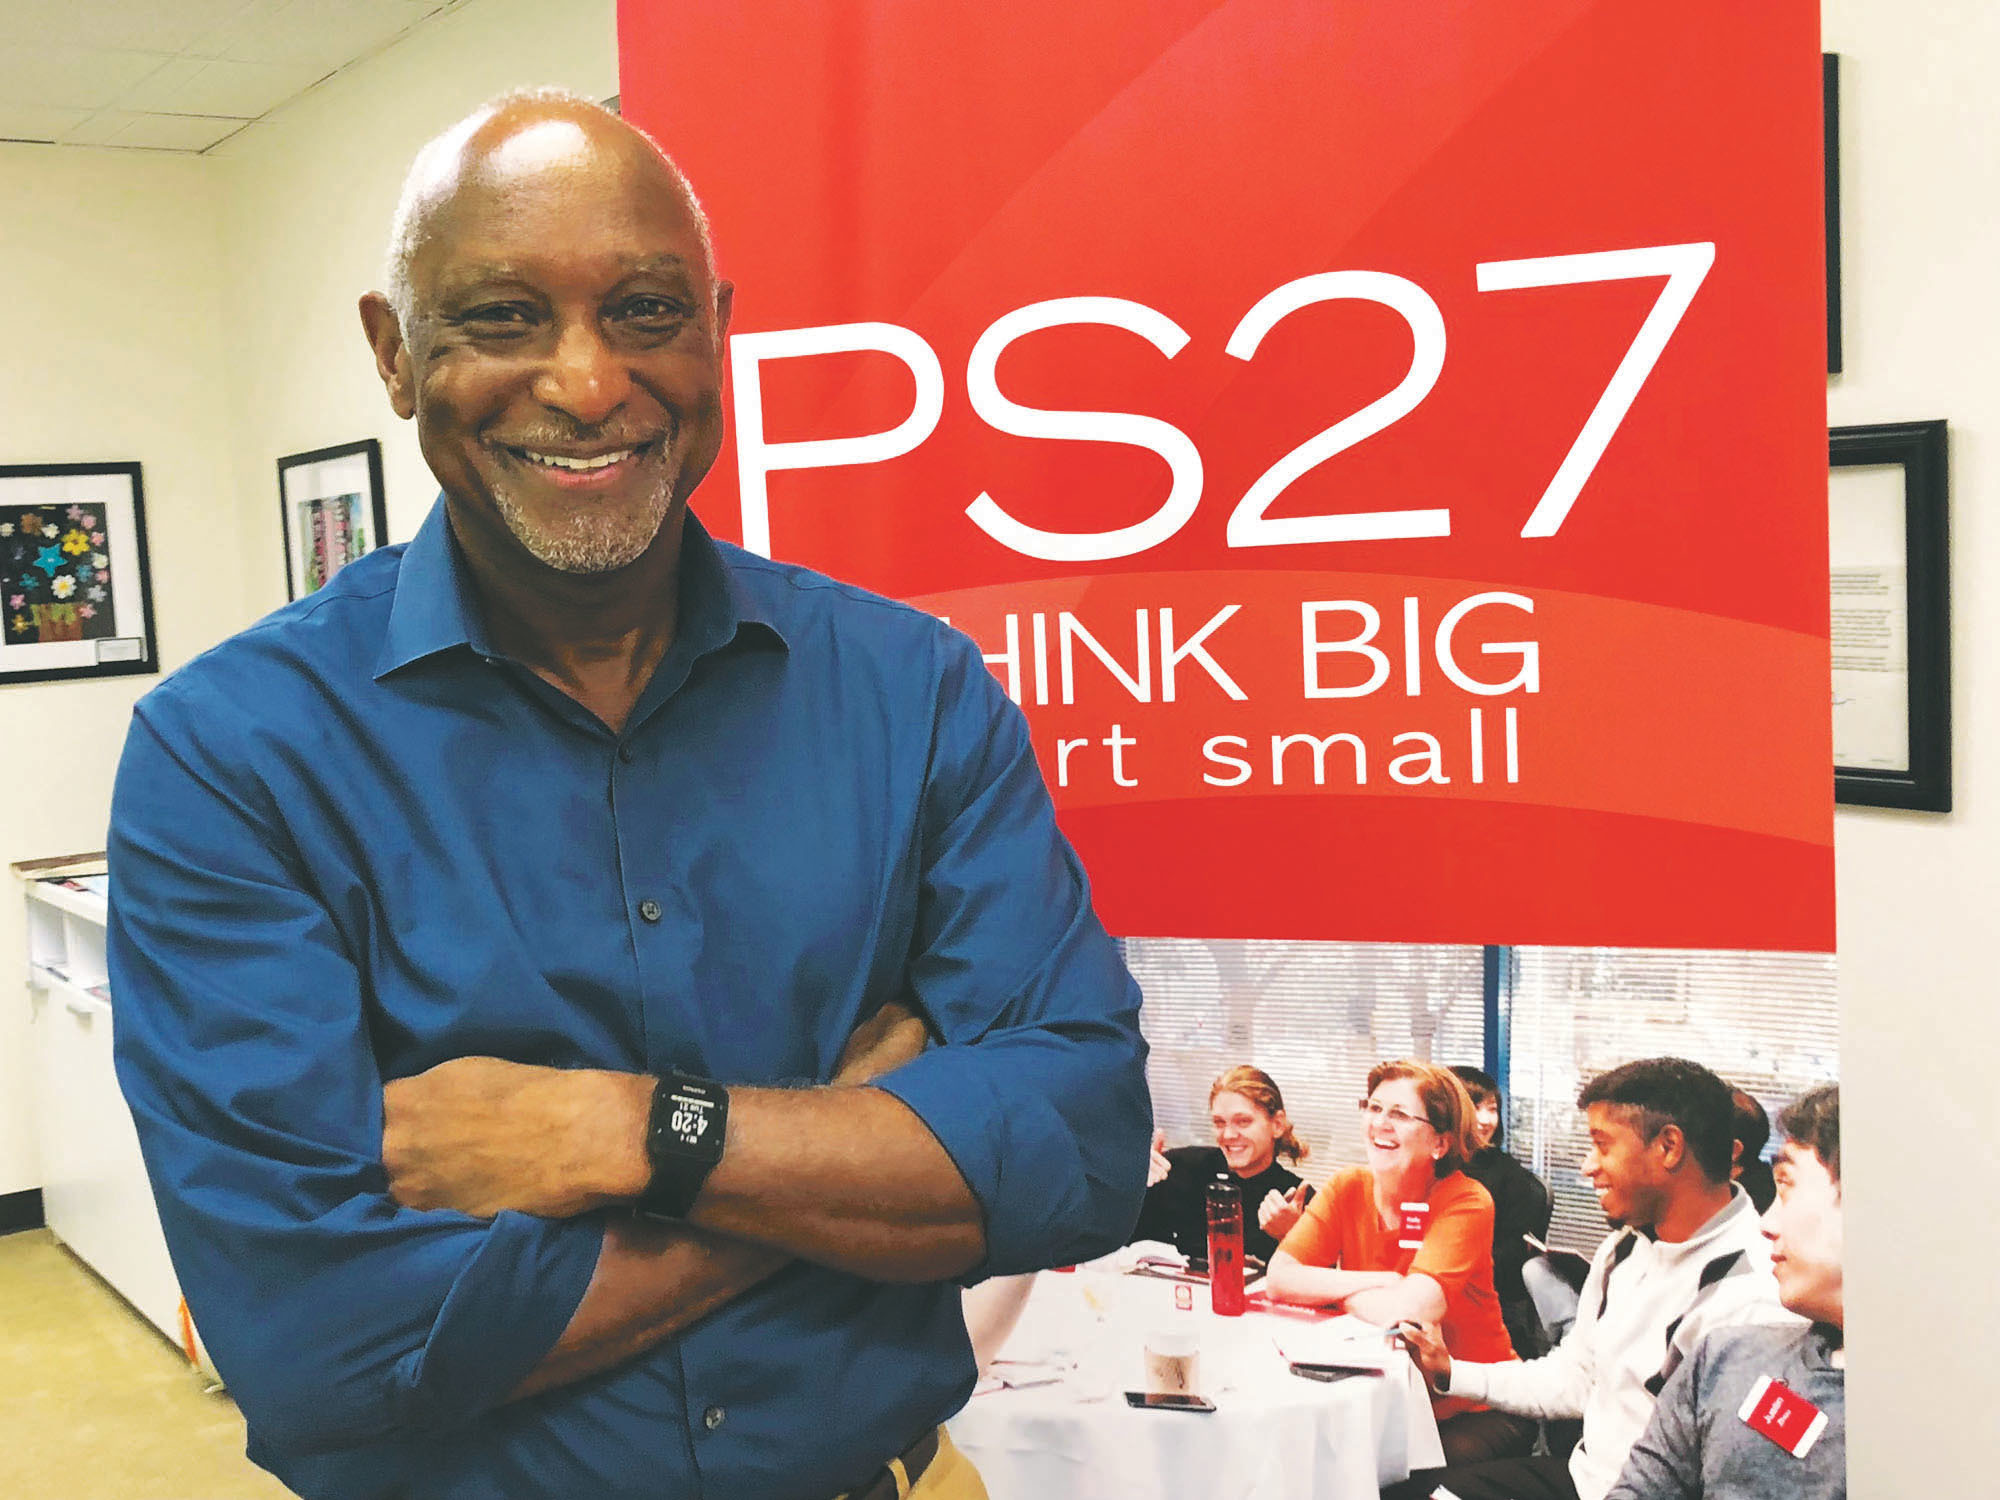 Jim Stallings, the founder of PS27 Ventures.